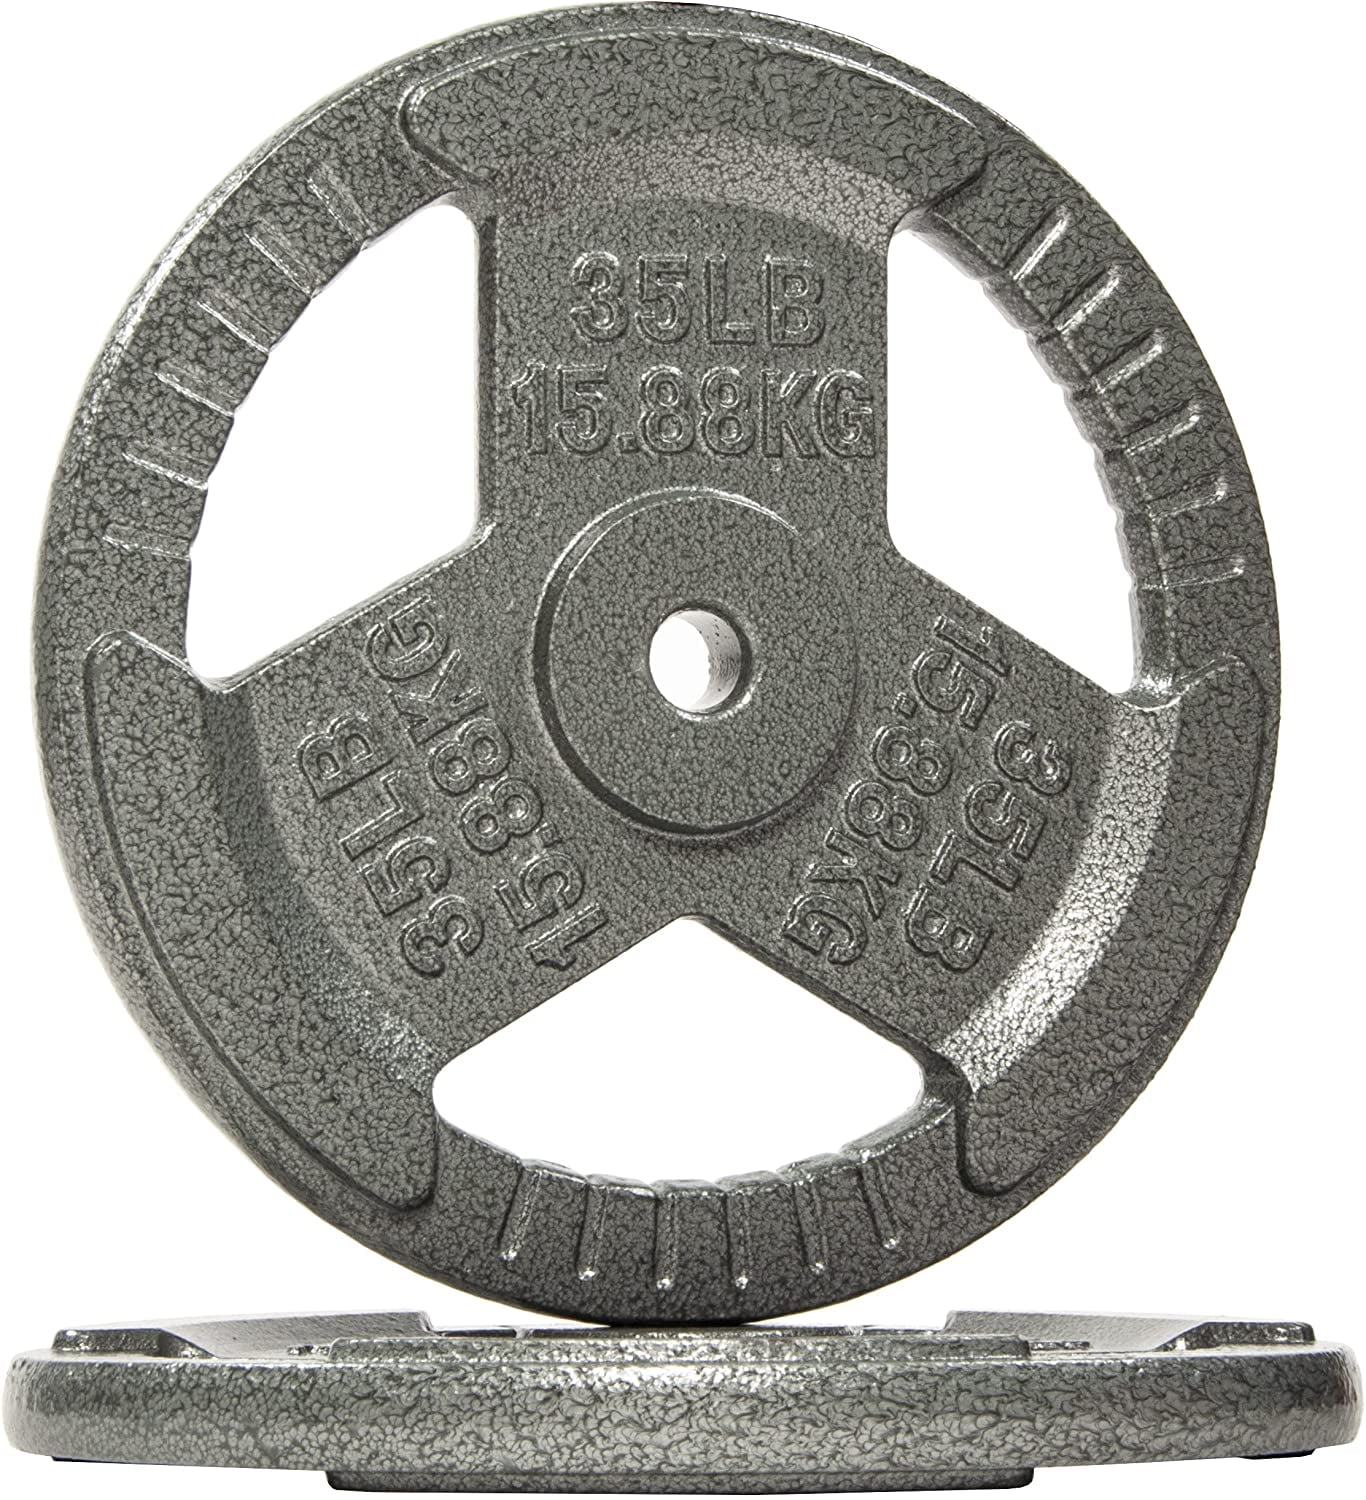 Balancefrom Olympic 2-Inch or Standard 1-Inch Cast Iron Plate Weight Plate for Strength Training and Weightlifting